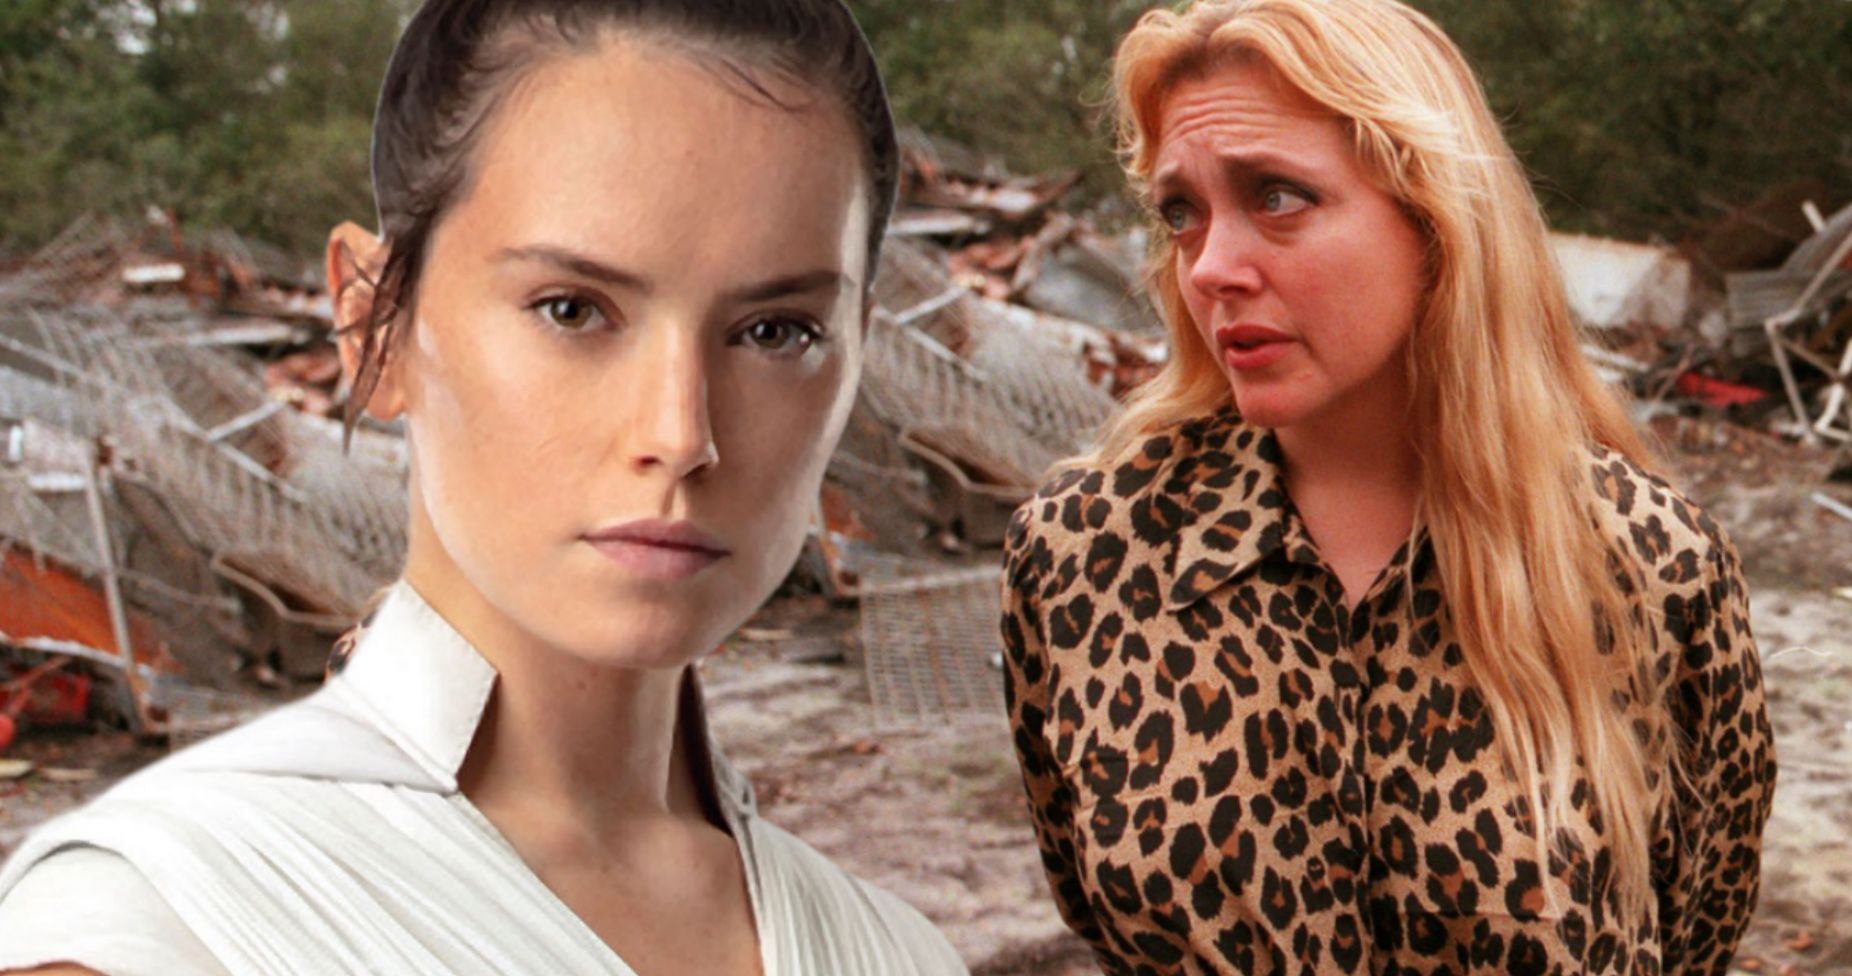 Daisy Ridley Has Strong Thoughts on Netflix's Tiger King and Carole Baskin